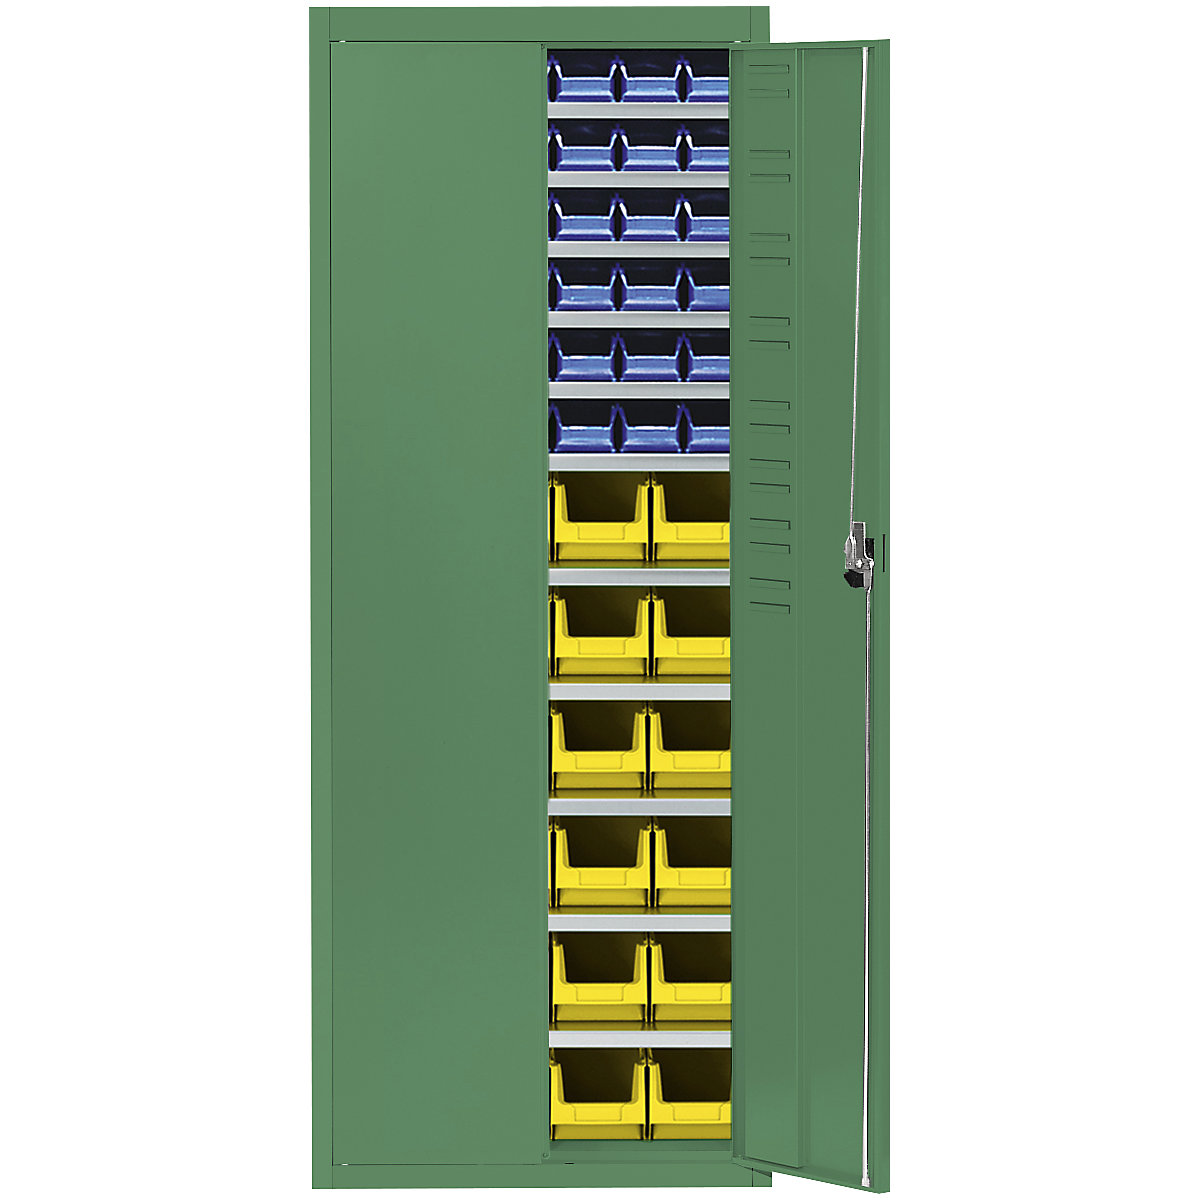 Storage cupboard with open fronted storage bins – mauser, HxWxD 1740 x 680 x 280 mm, single colour, green, 60 bins-10